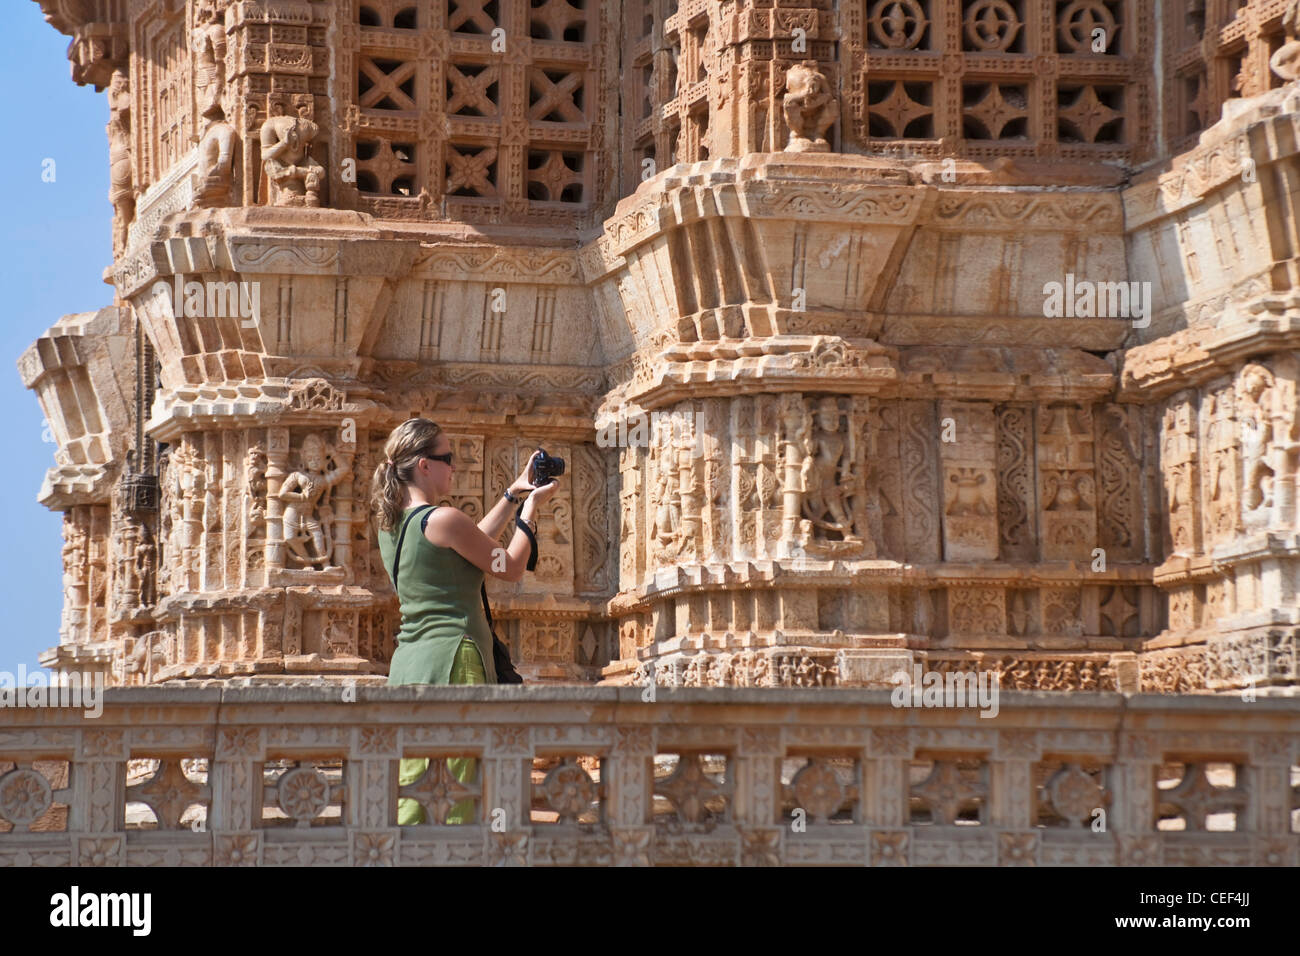 Tourist photographing the Jain temple in Chittorgarh Fort, Rajasthan, India Stock Photo